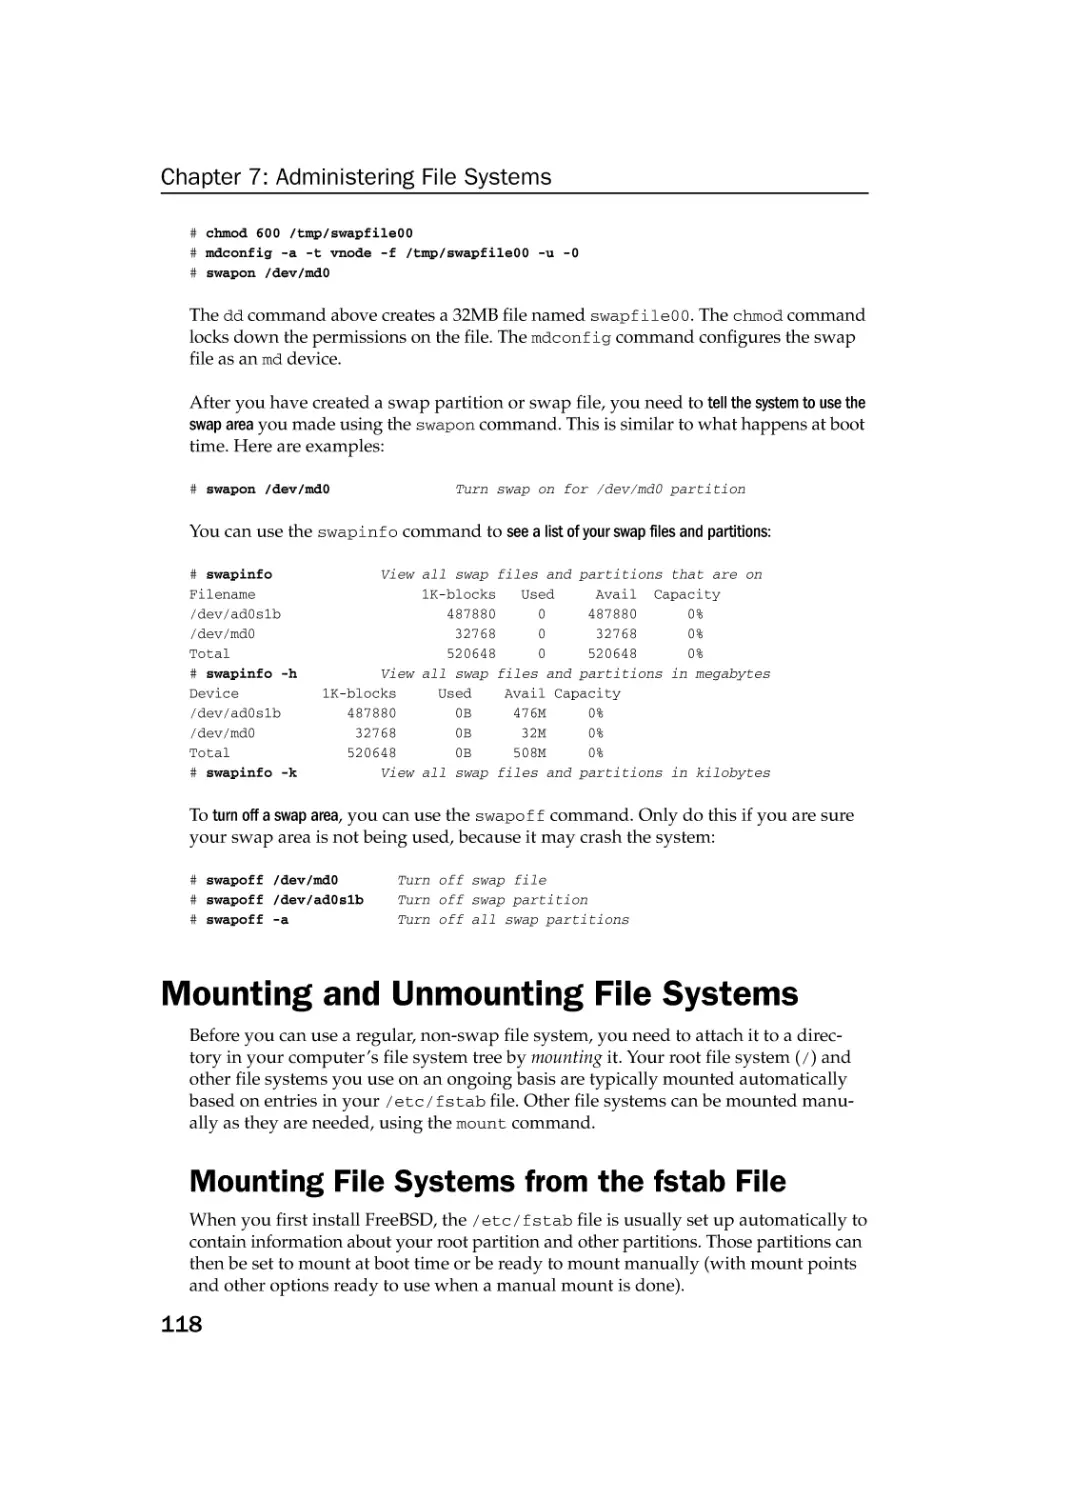 Mounting and Unmounting File Systems